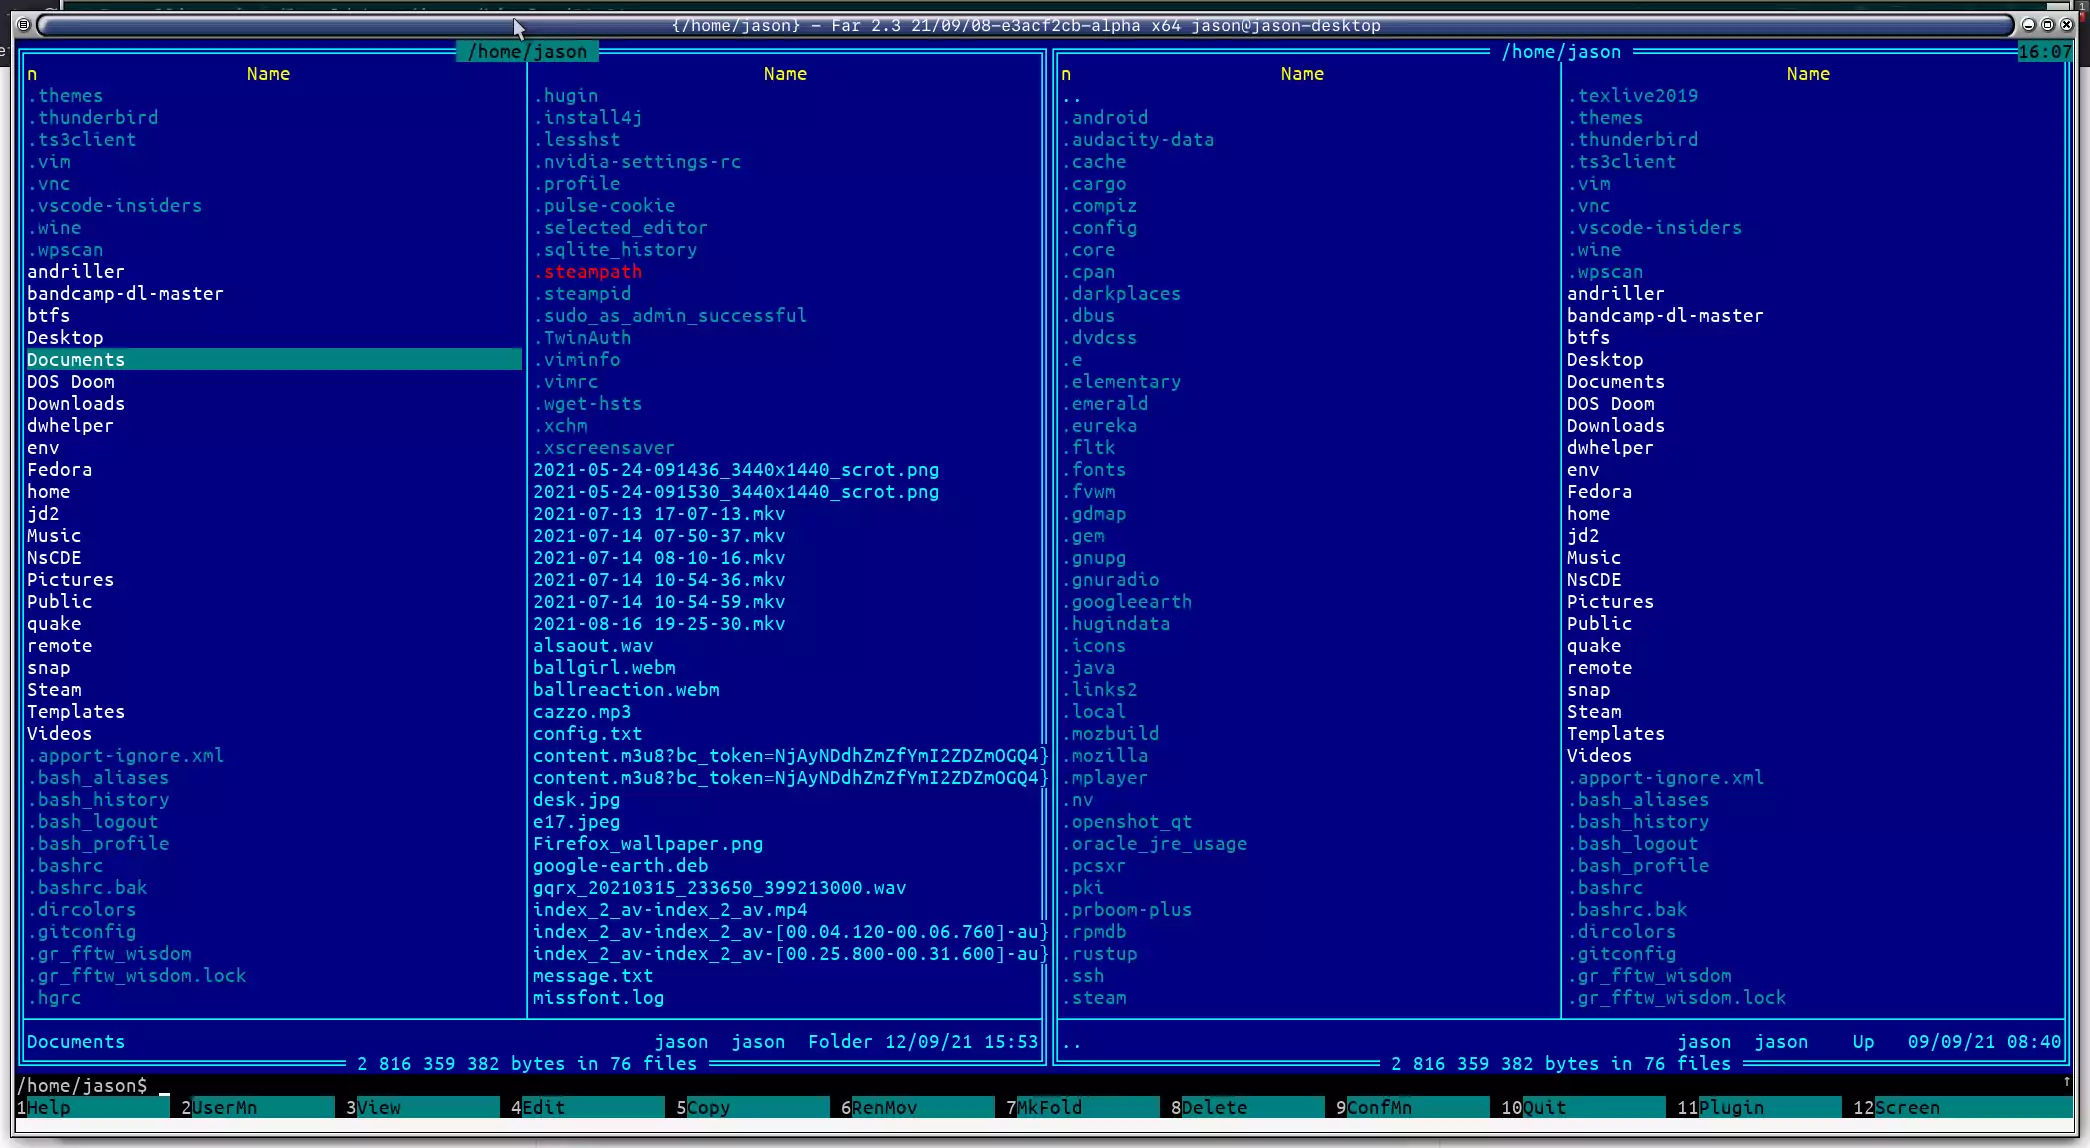 Far 21 file manager running on Linux.